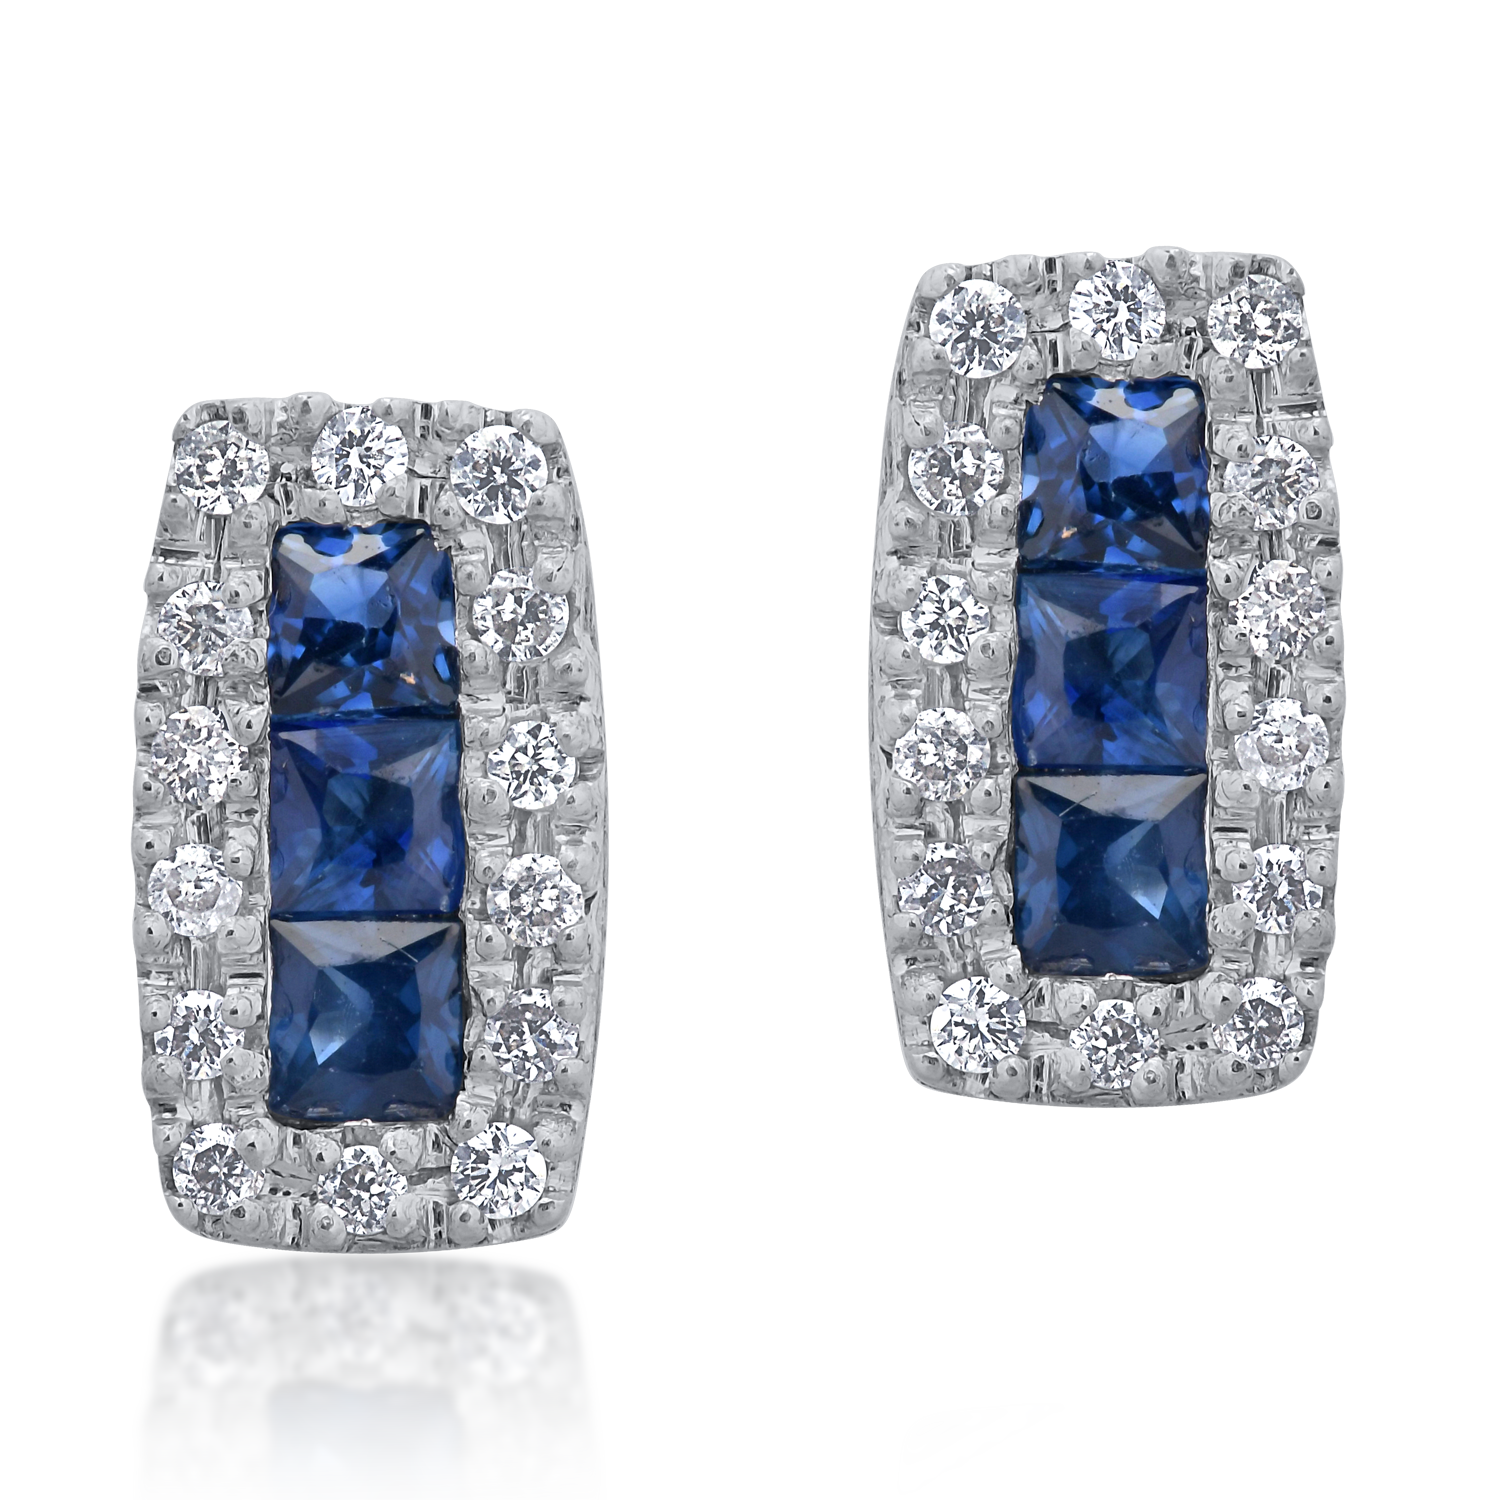 18K white gold earrings with 0.36ct sapphires and 0.11ct diamonds